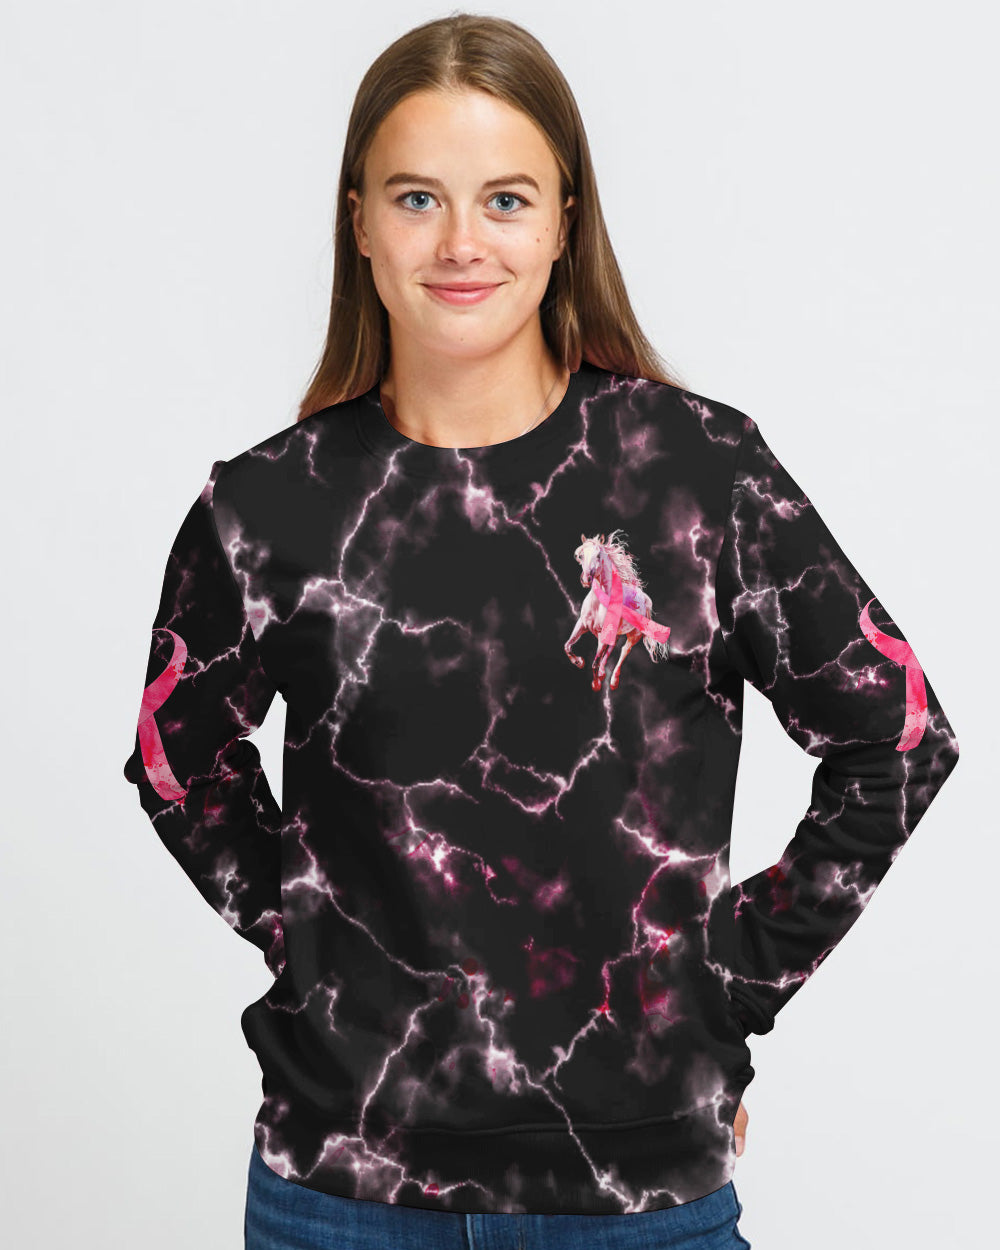 Be Stronger Than The Storm Horse Women's Breast Cancer Awareness Sweatshirt